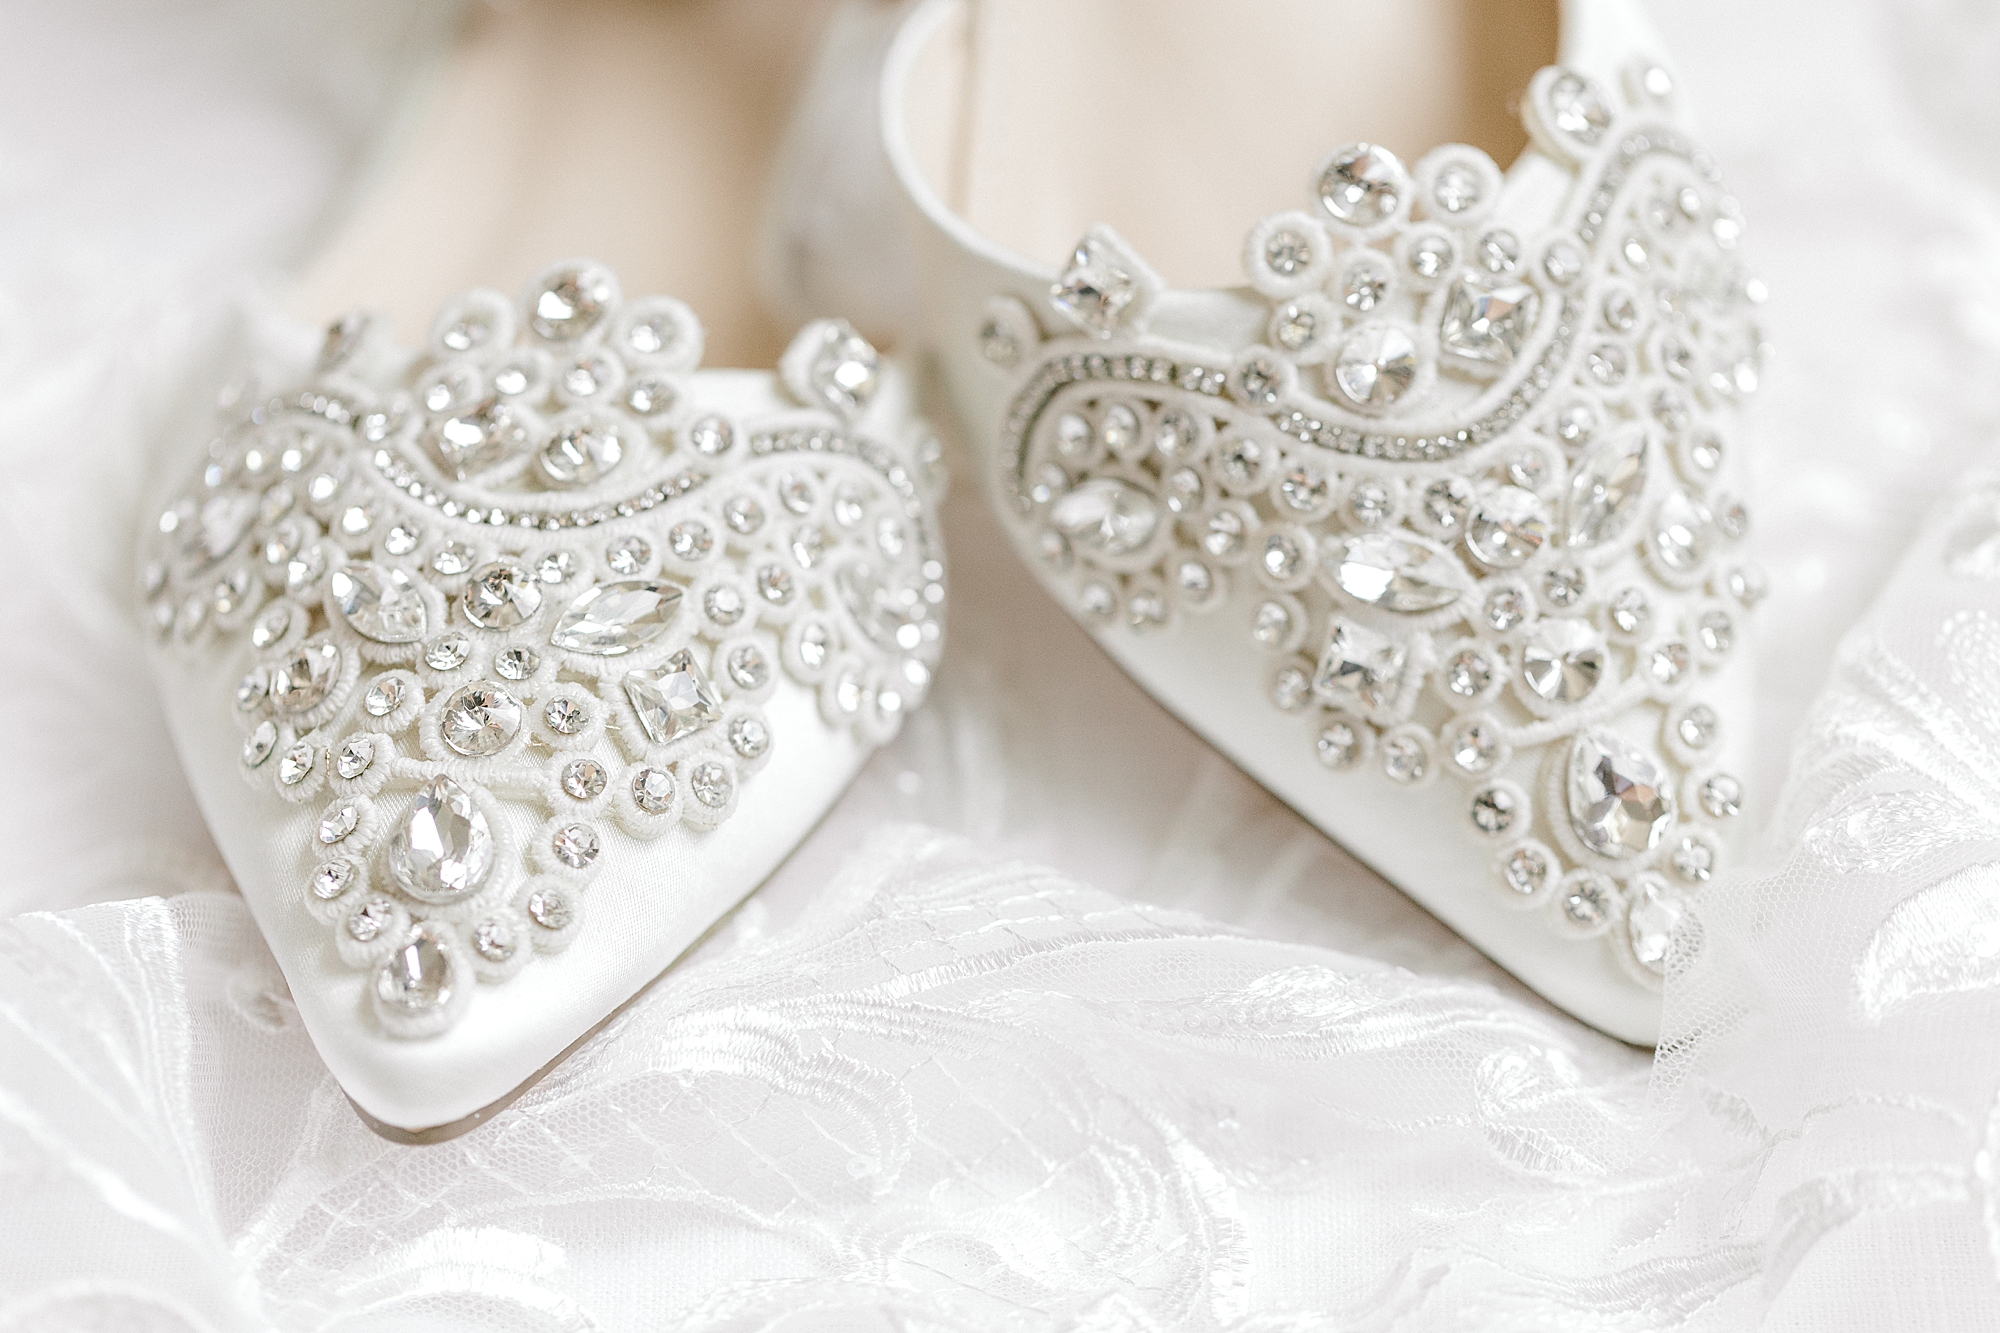 sparkly silver shoes for bride